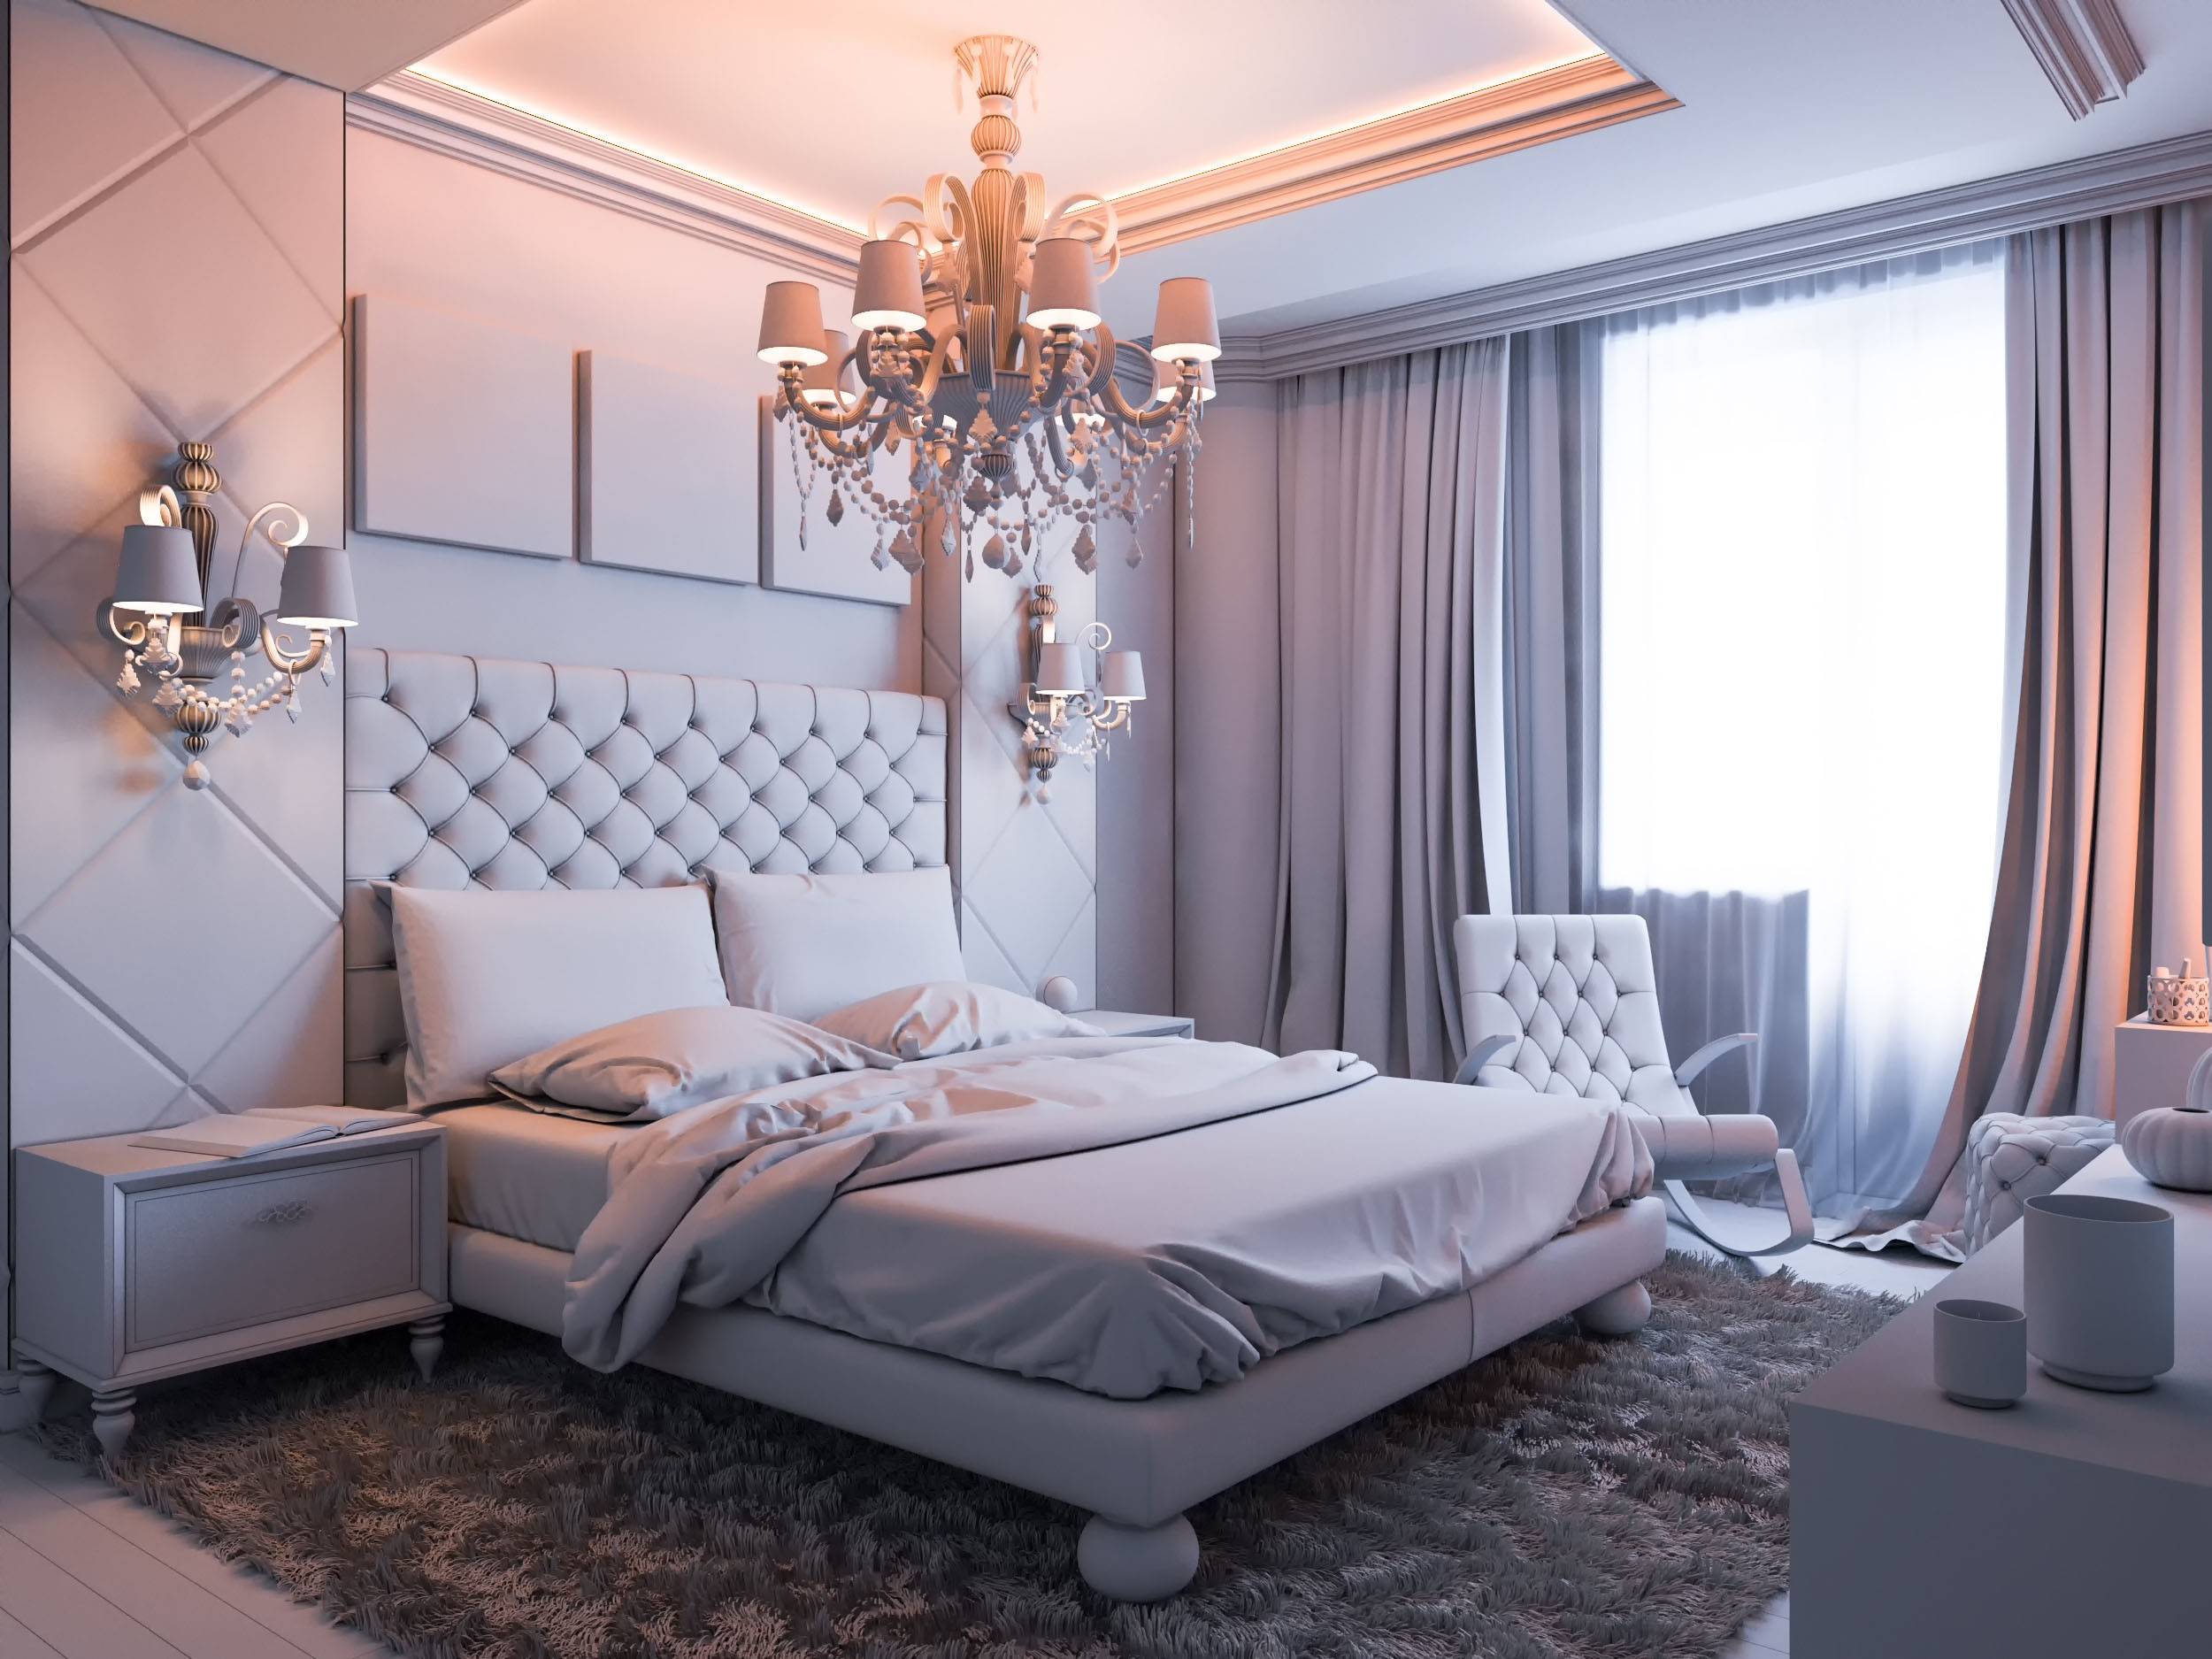 Couples Bedroom Decor
 Blending designs to create a couples bedroom